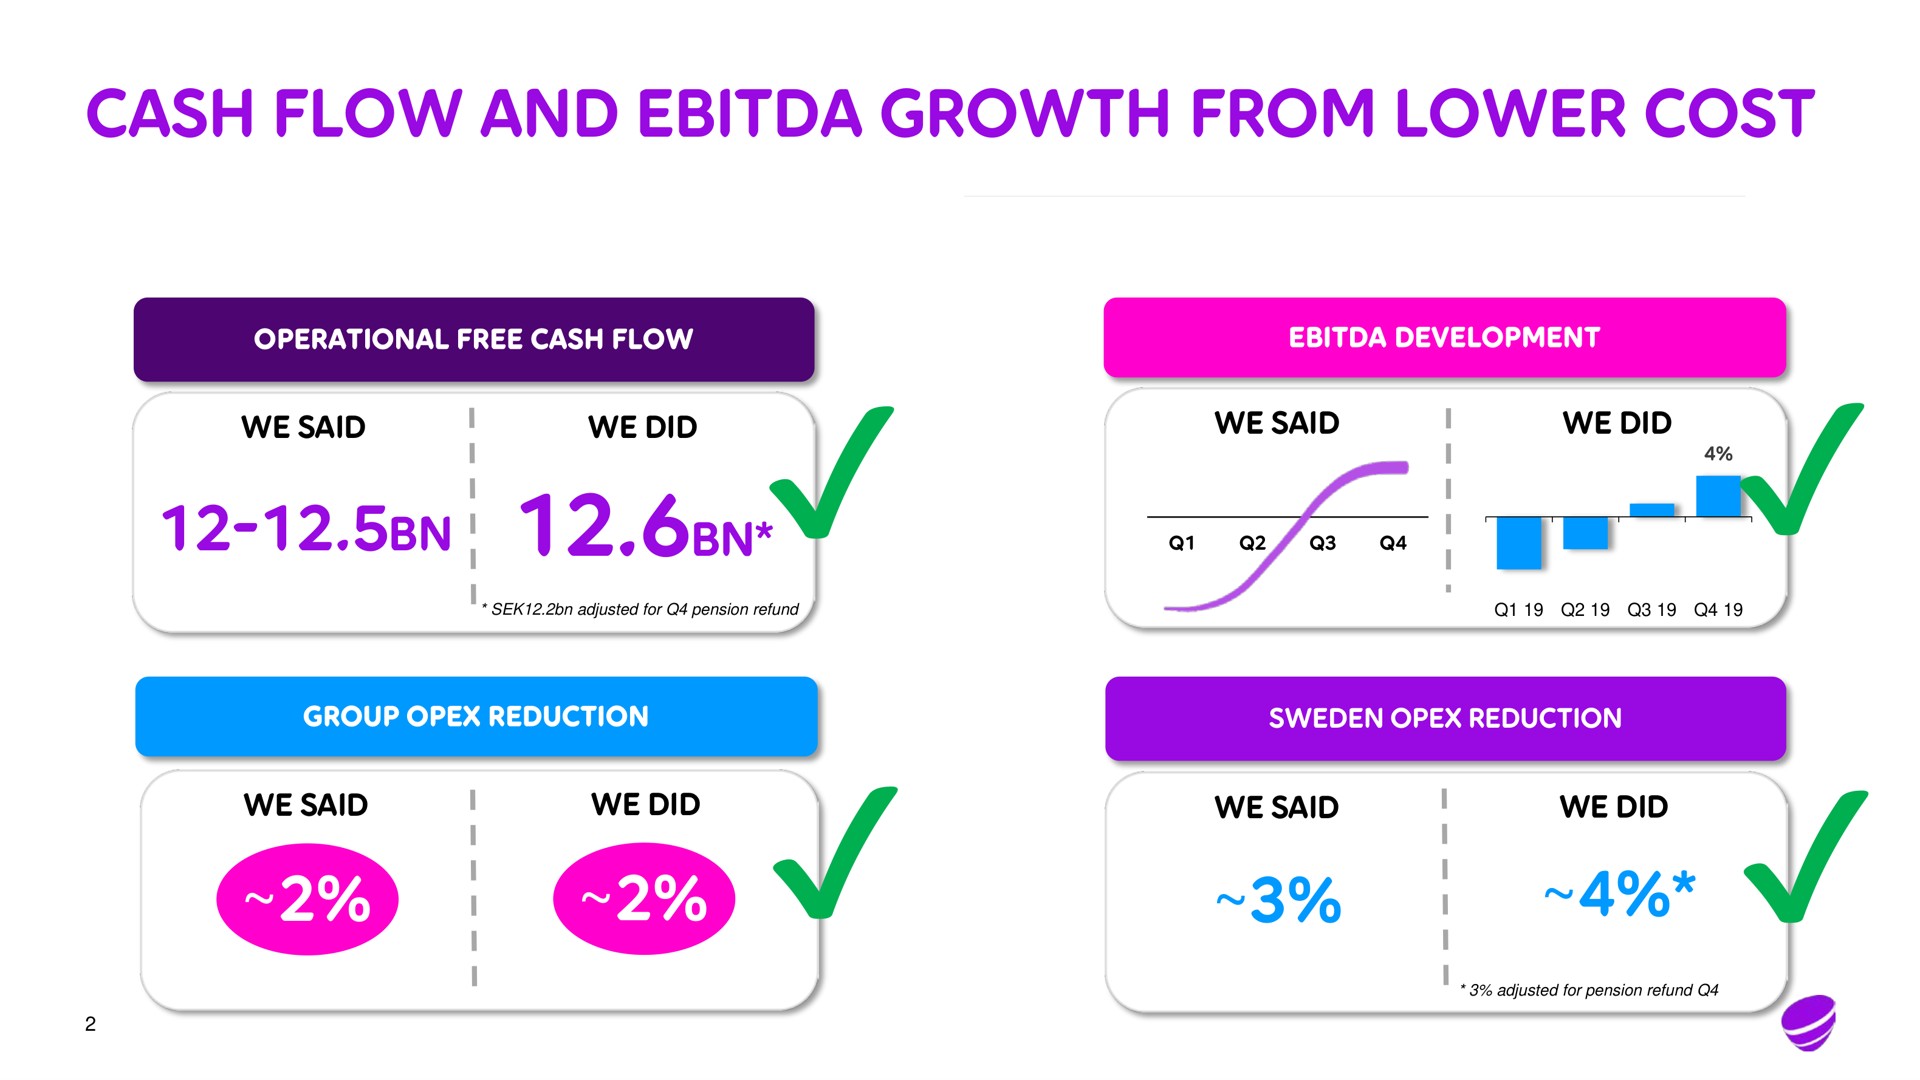 cash flow and growth from lower cost | Telia Company